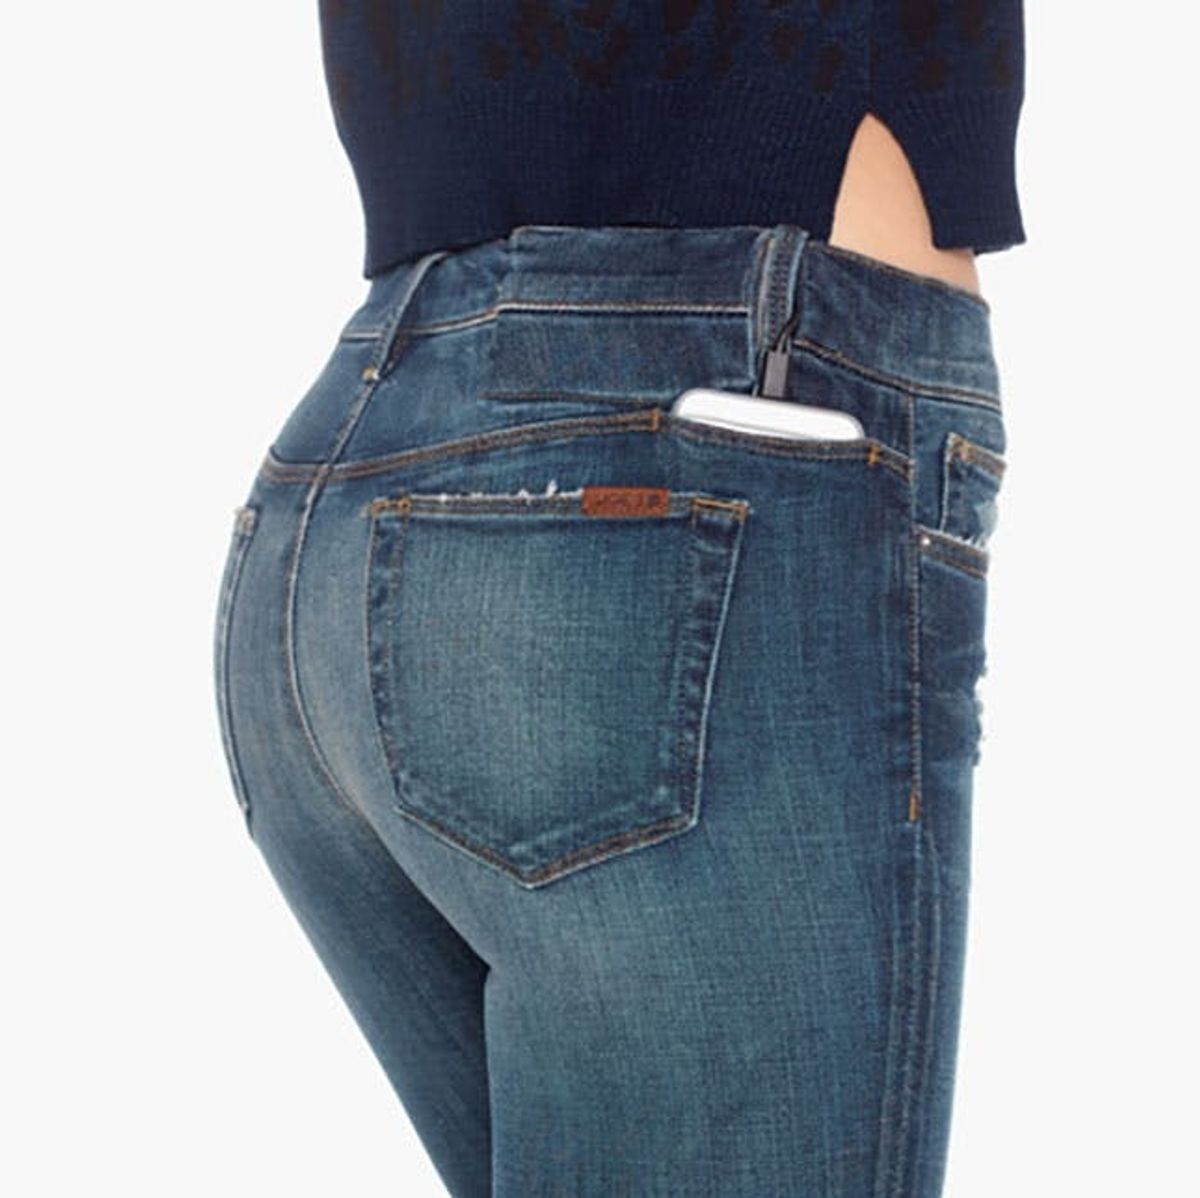 These New Skinny Jeans Charge Your Phone